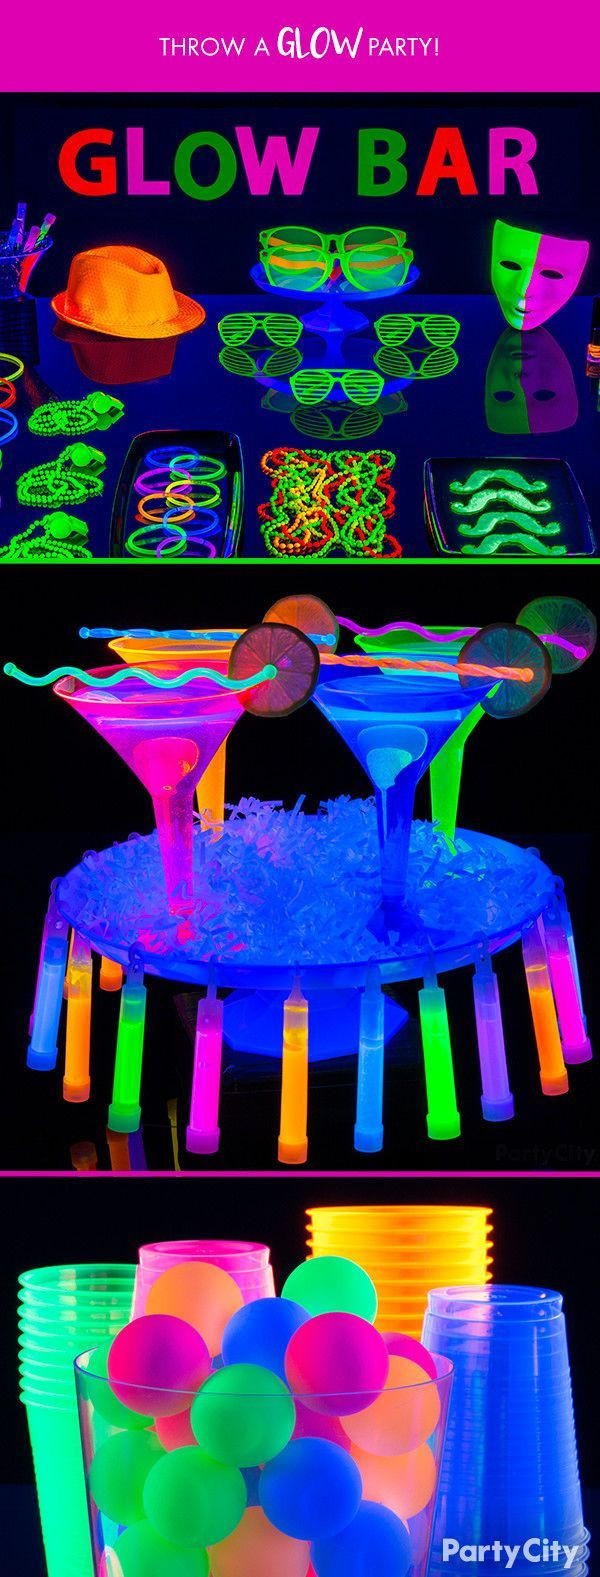 Glow In The Dark Pool Party Ideas
 When the lights go out the party’s on Let it glow all